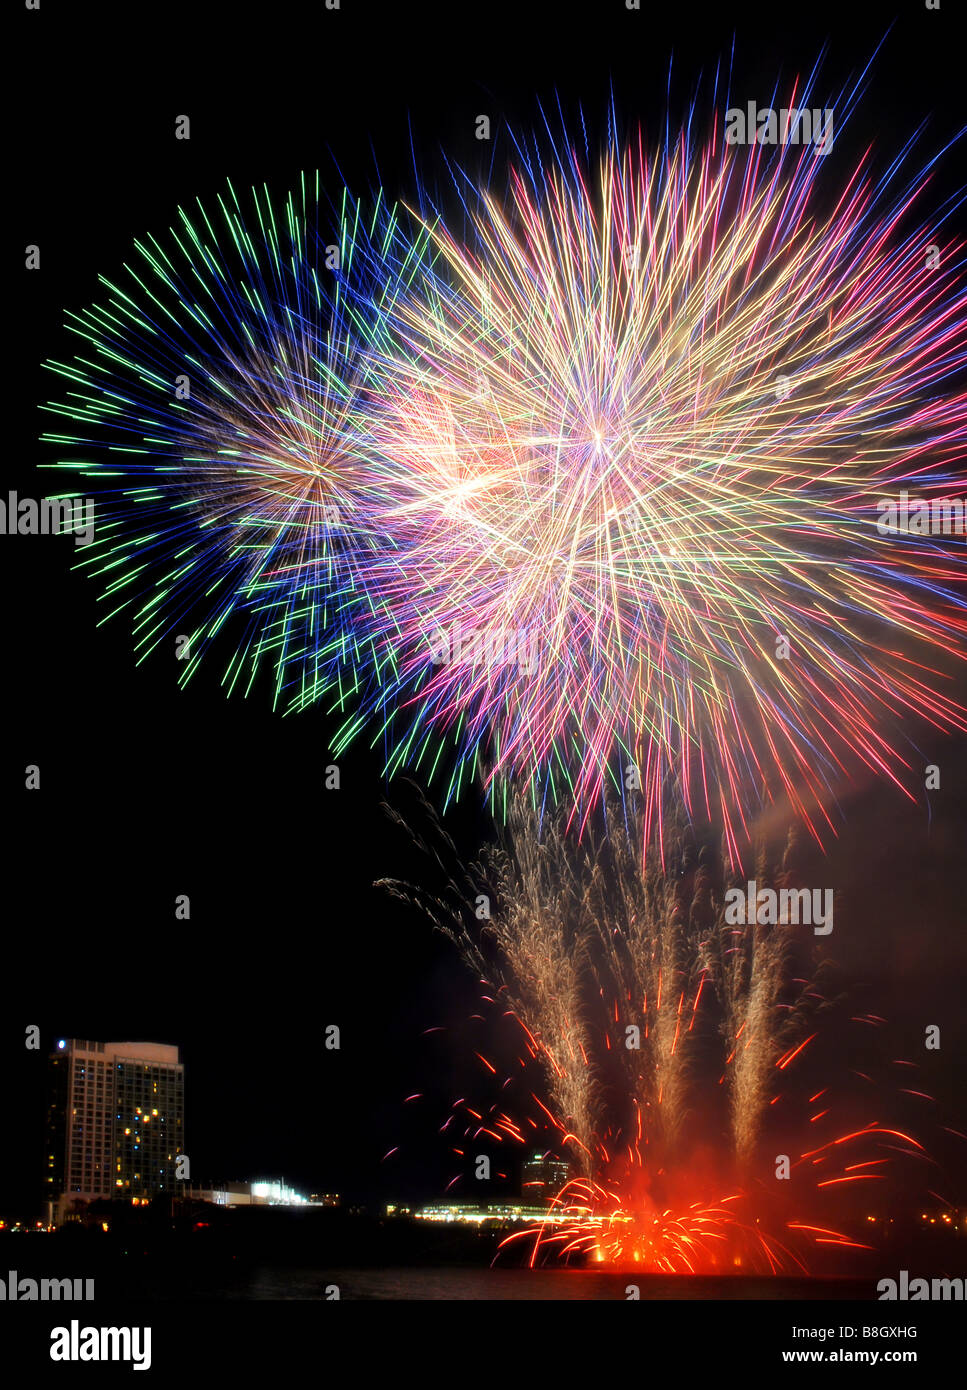 Fireworks light up the night sky during an International Fireworks Competition. Stock Photo